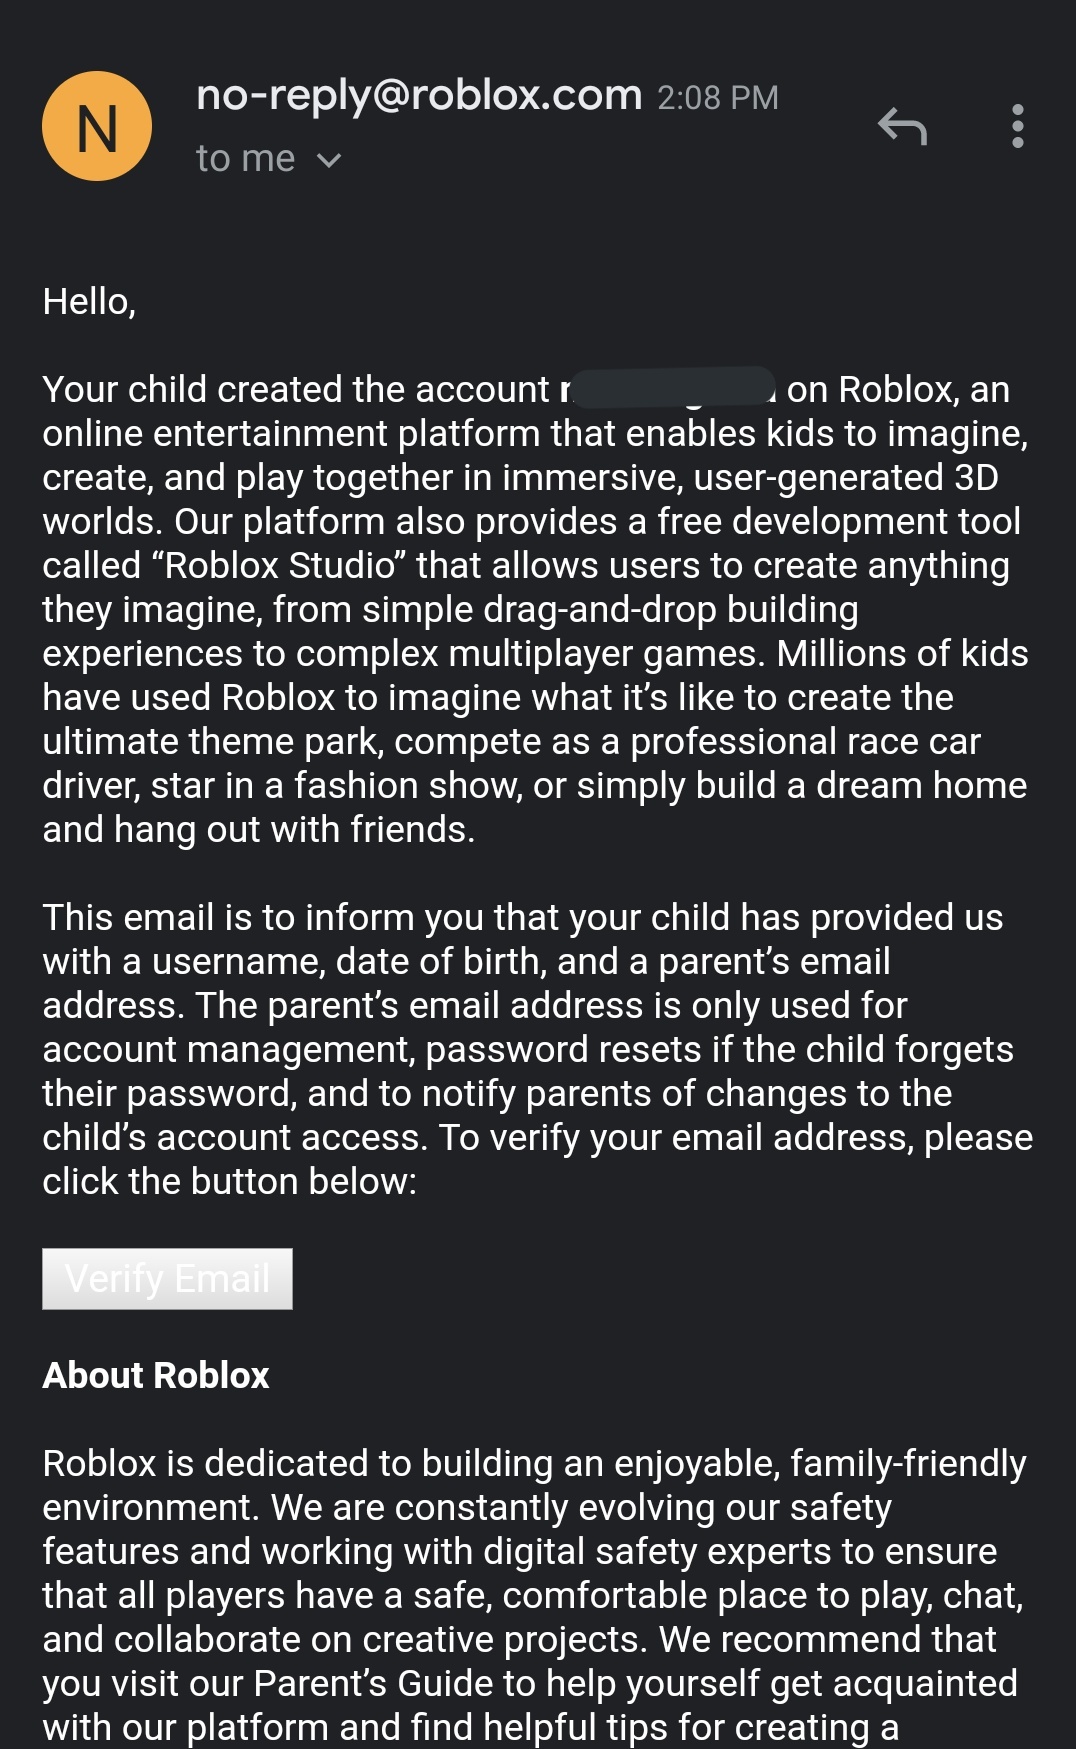 Mikehaze On Twitter I Get This Msg Everyday From Roblox About A Child Who Needs Me To Verify Their Account So They Can Play I Tried To Verify The Email But I - roblox parent's email address